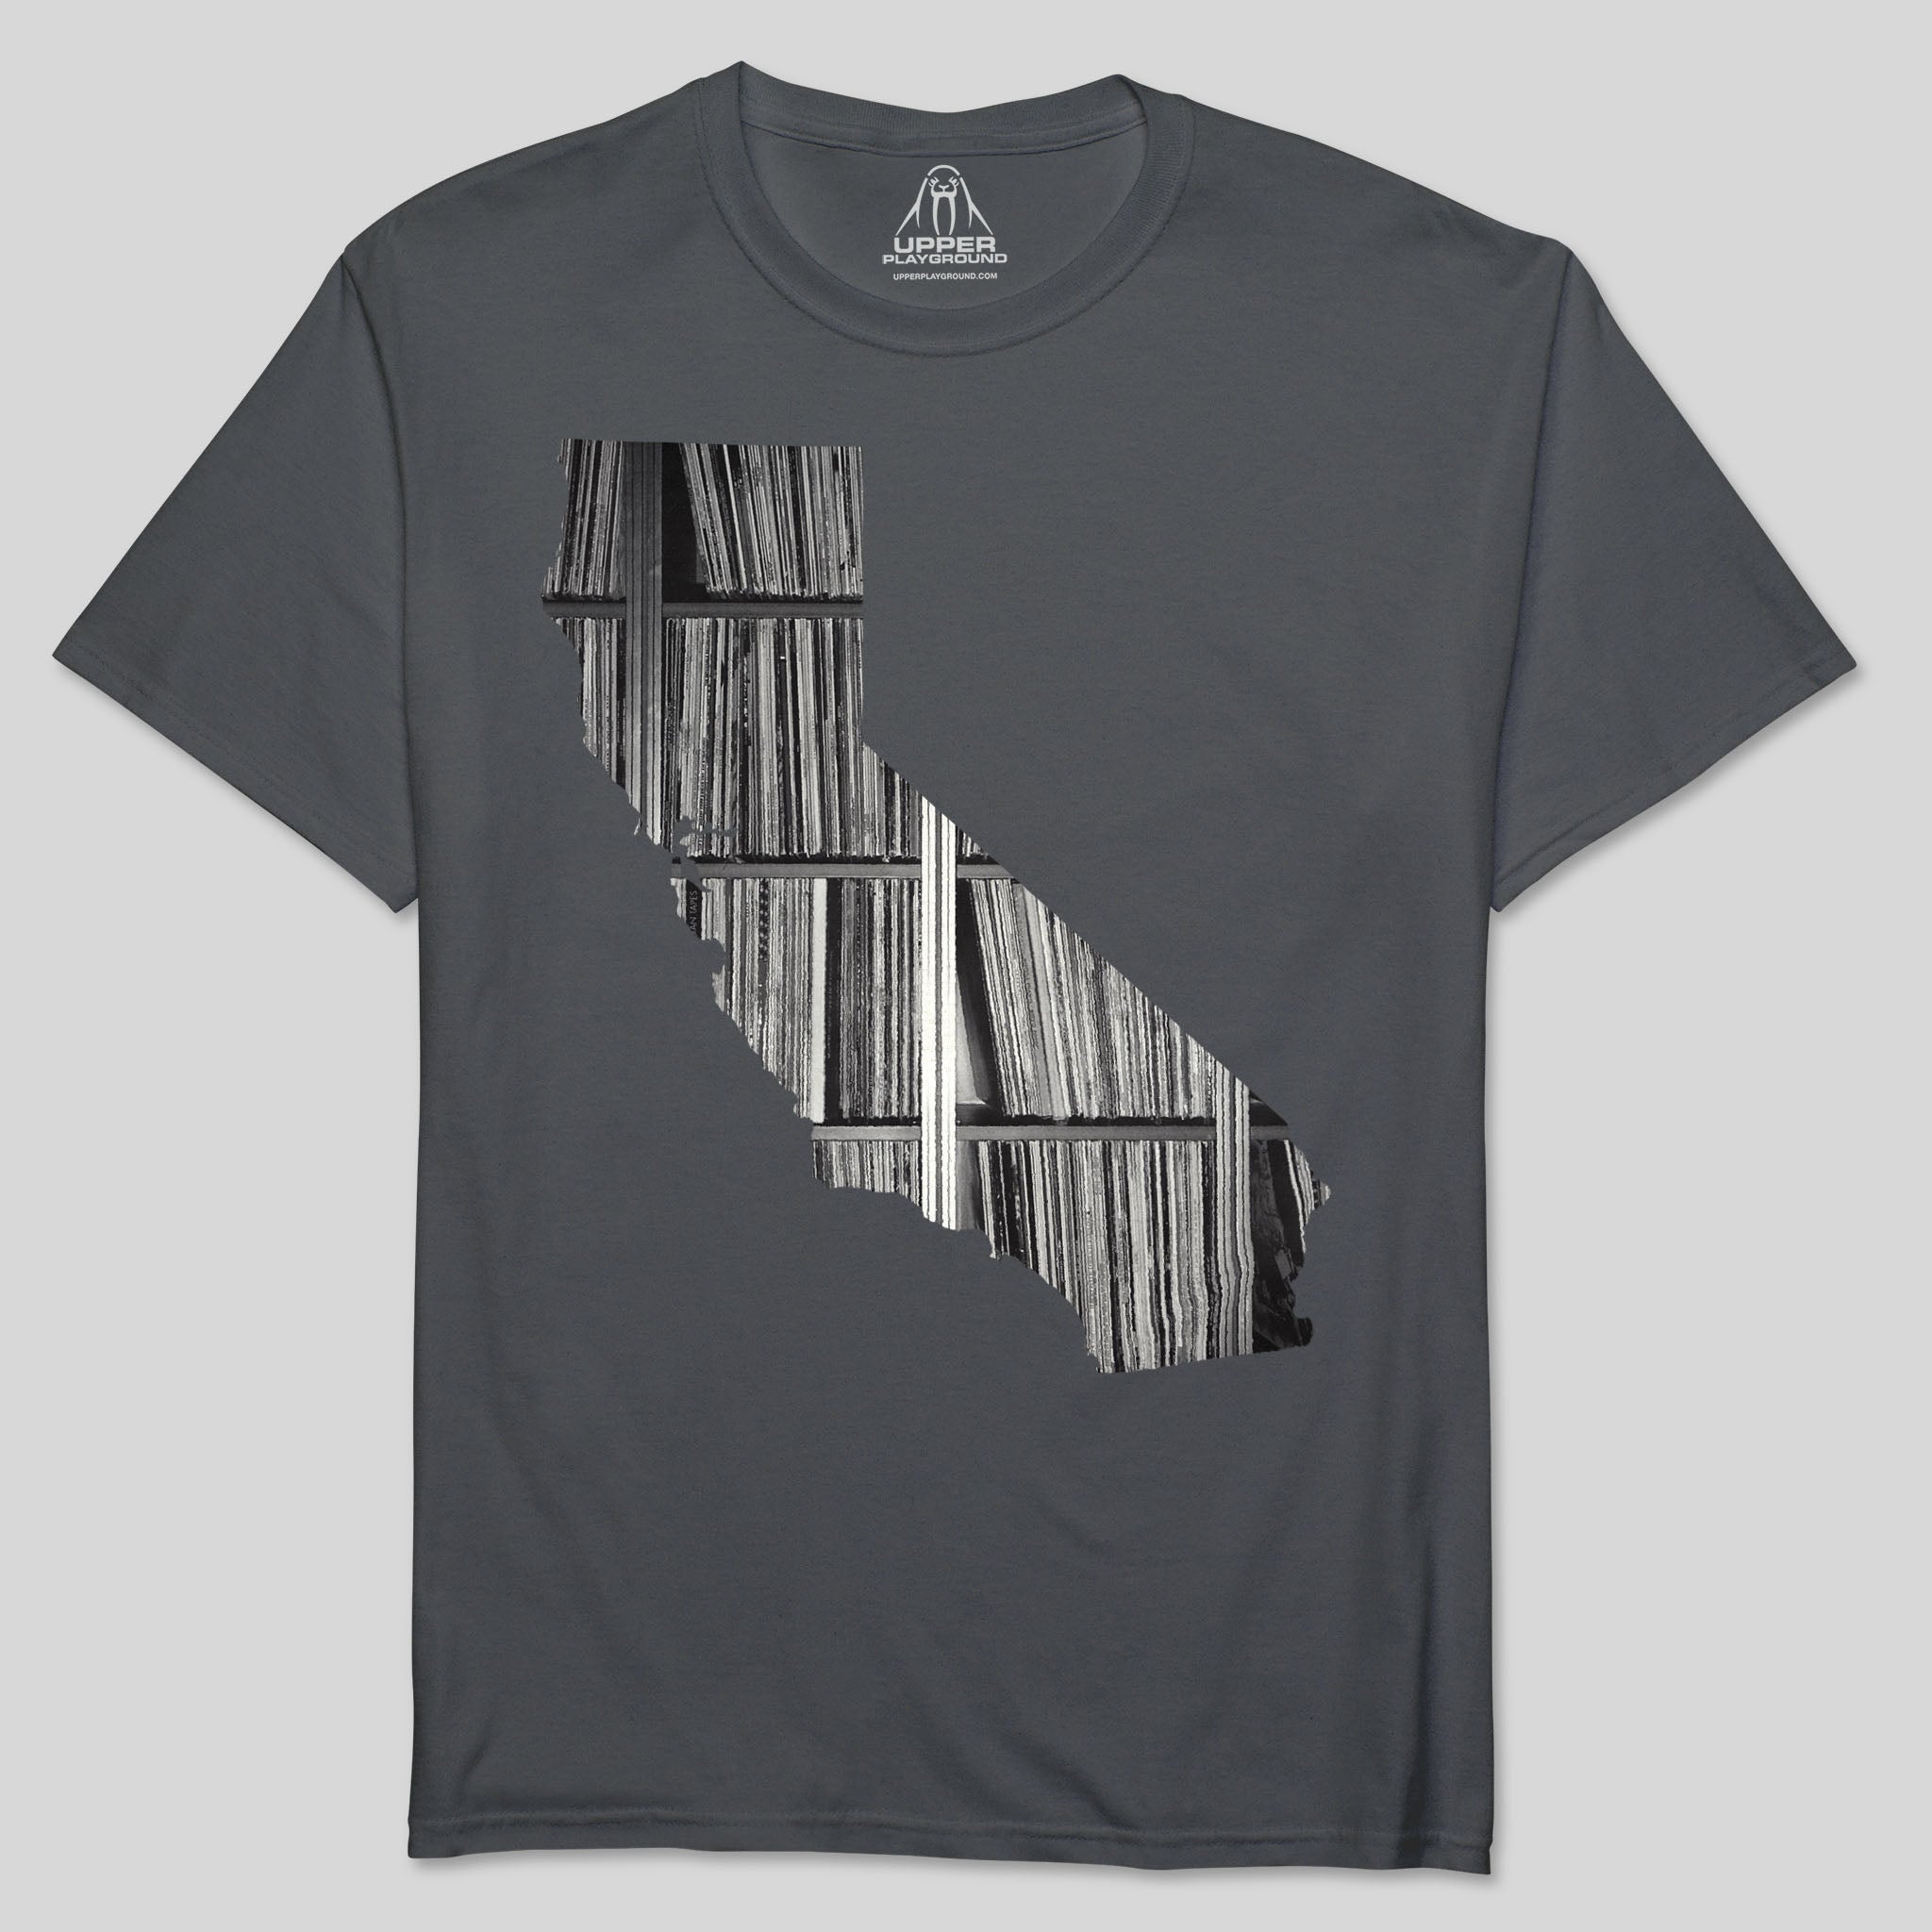 Men's Record Graphic T-Shirt